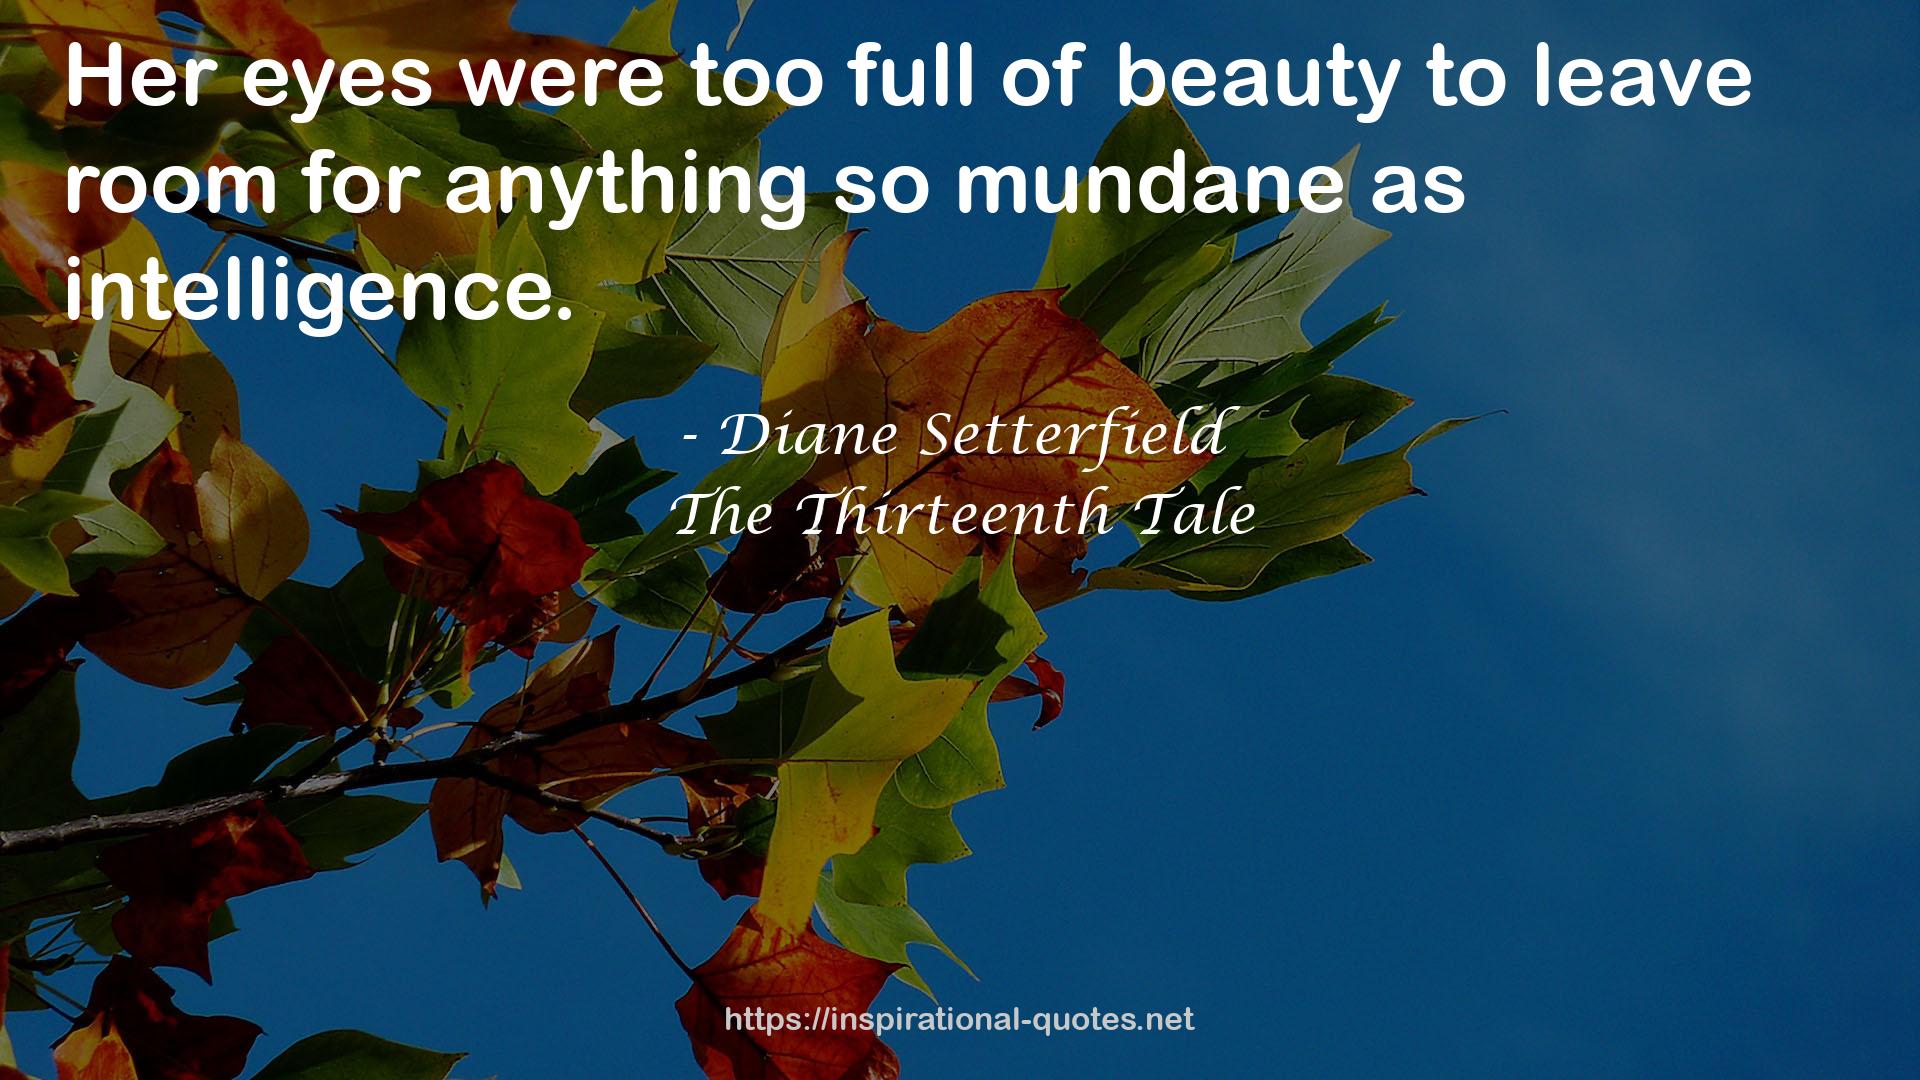 Diane Setterfield QUOTES